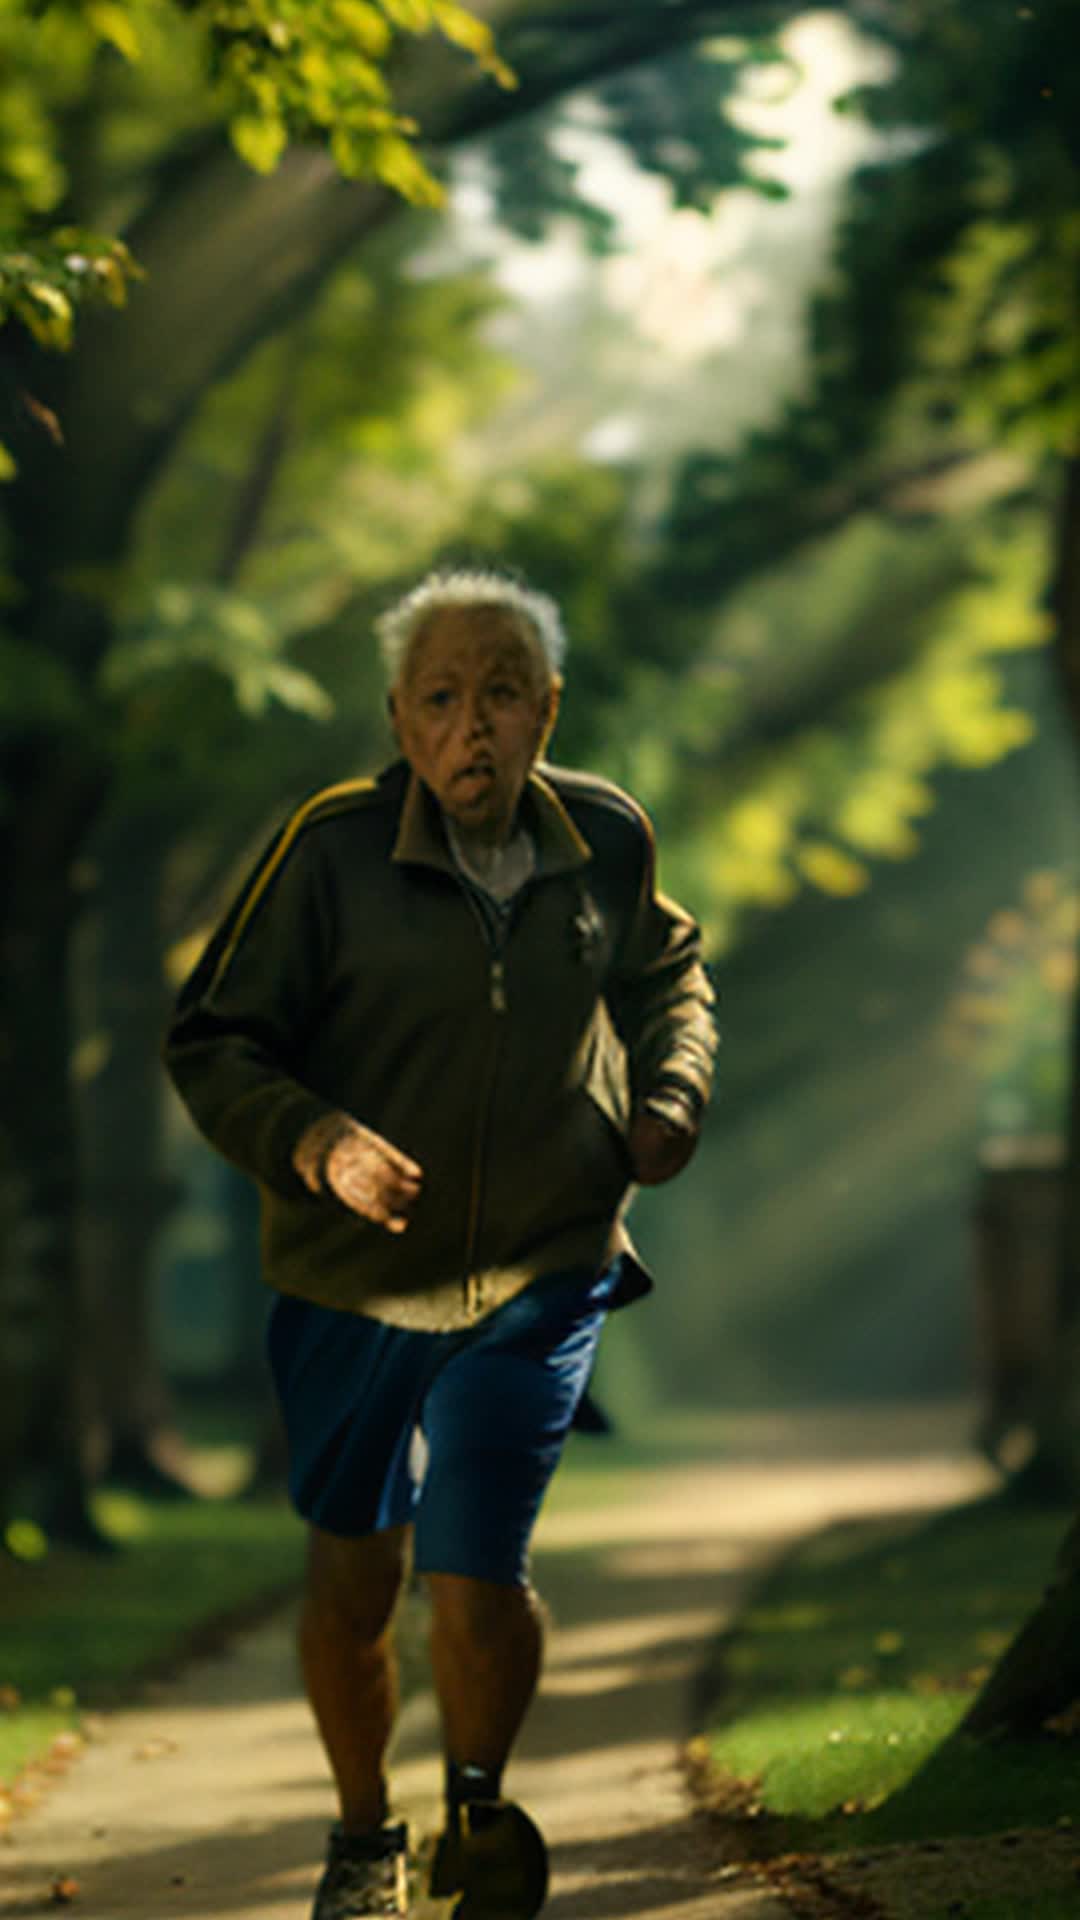 Old lady crying, background sounds echoing, surrounding trees, Harish Kumar running closer, vibrant motion blur, emotional intensity, high resolution, warm sunlight filtering through leaves